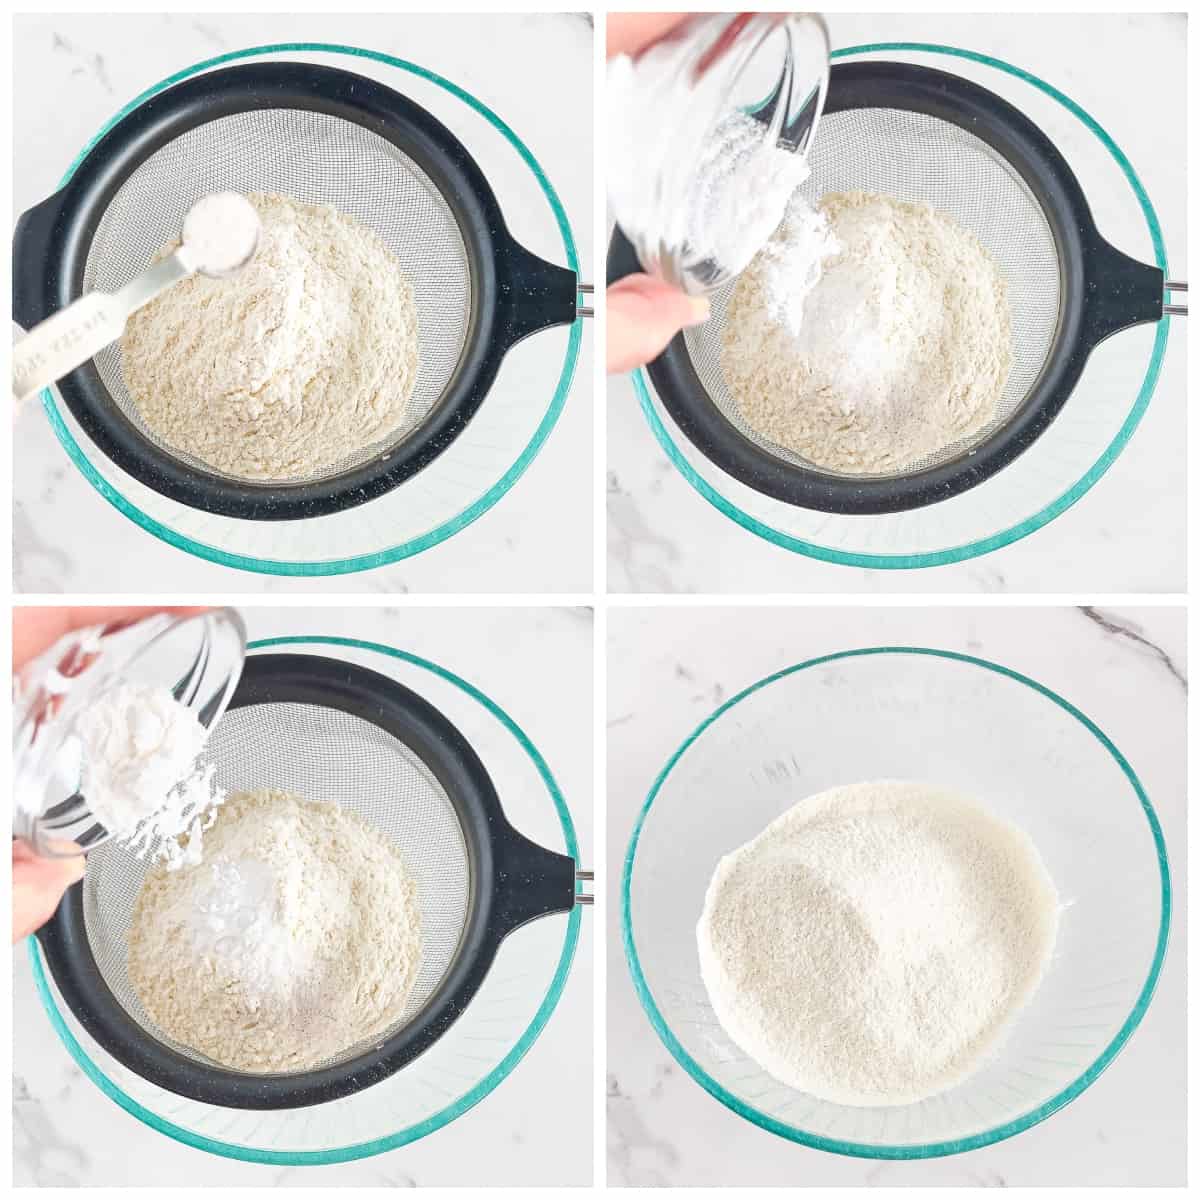 Start by adding the flour to a sifter placed over a medium bowl. 